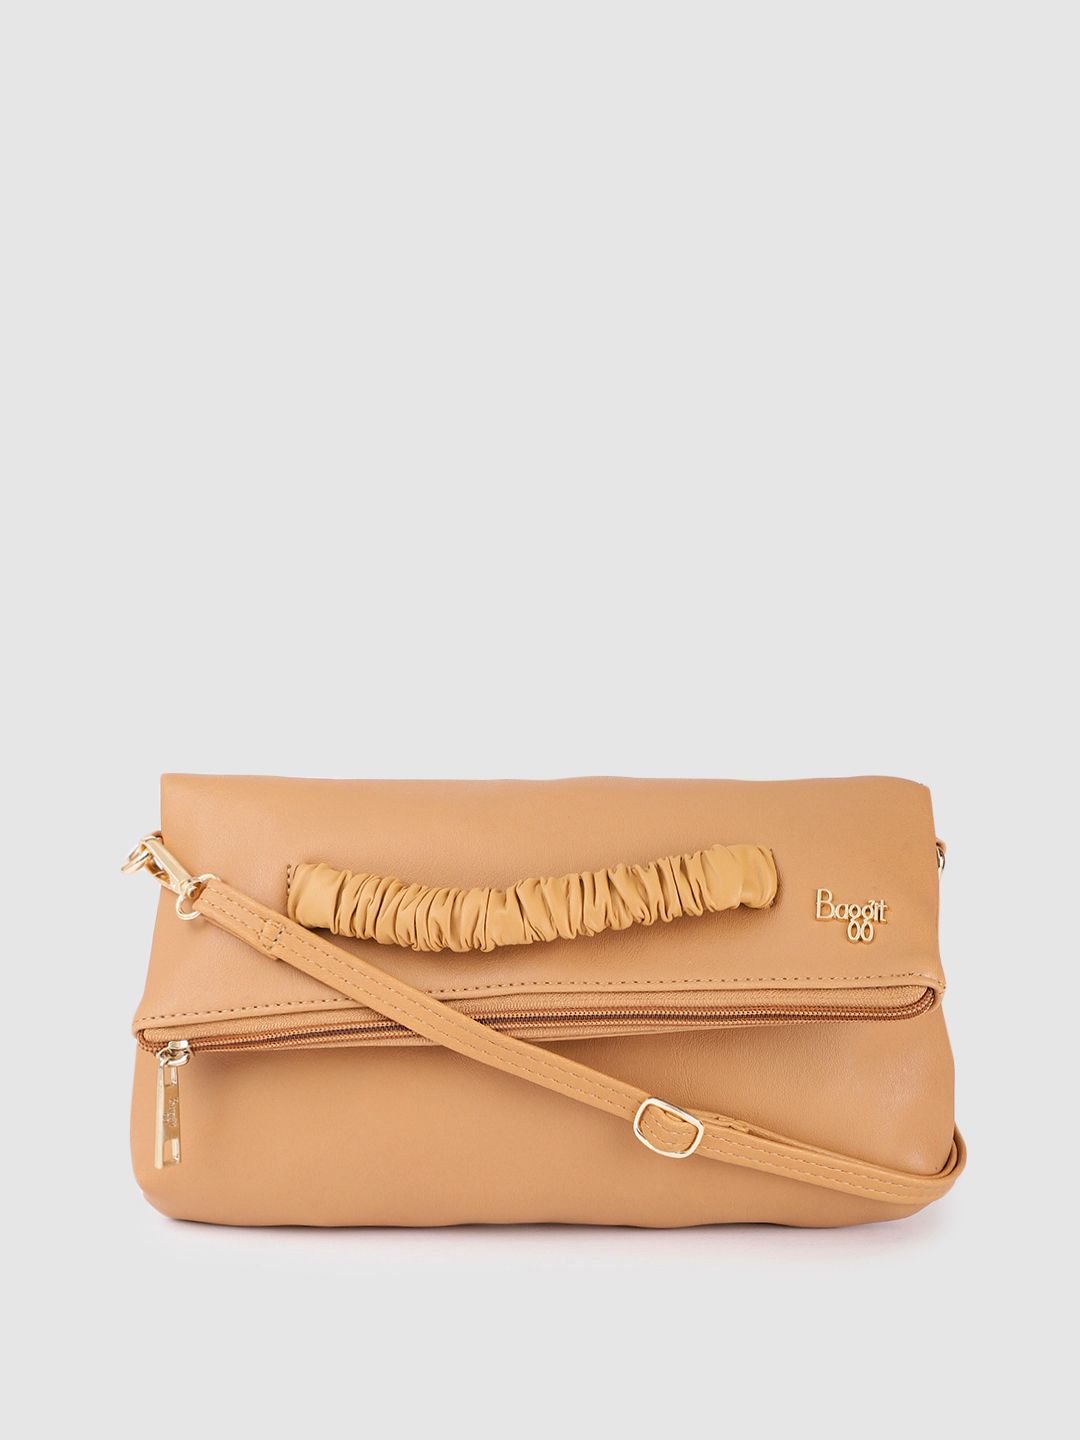 Baggit Beige Structured Sling Bag Price in India